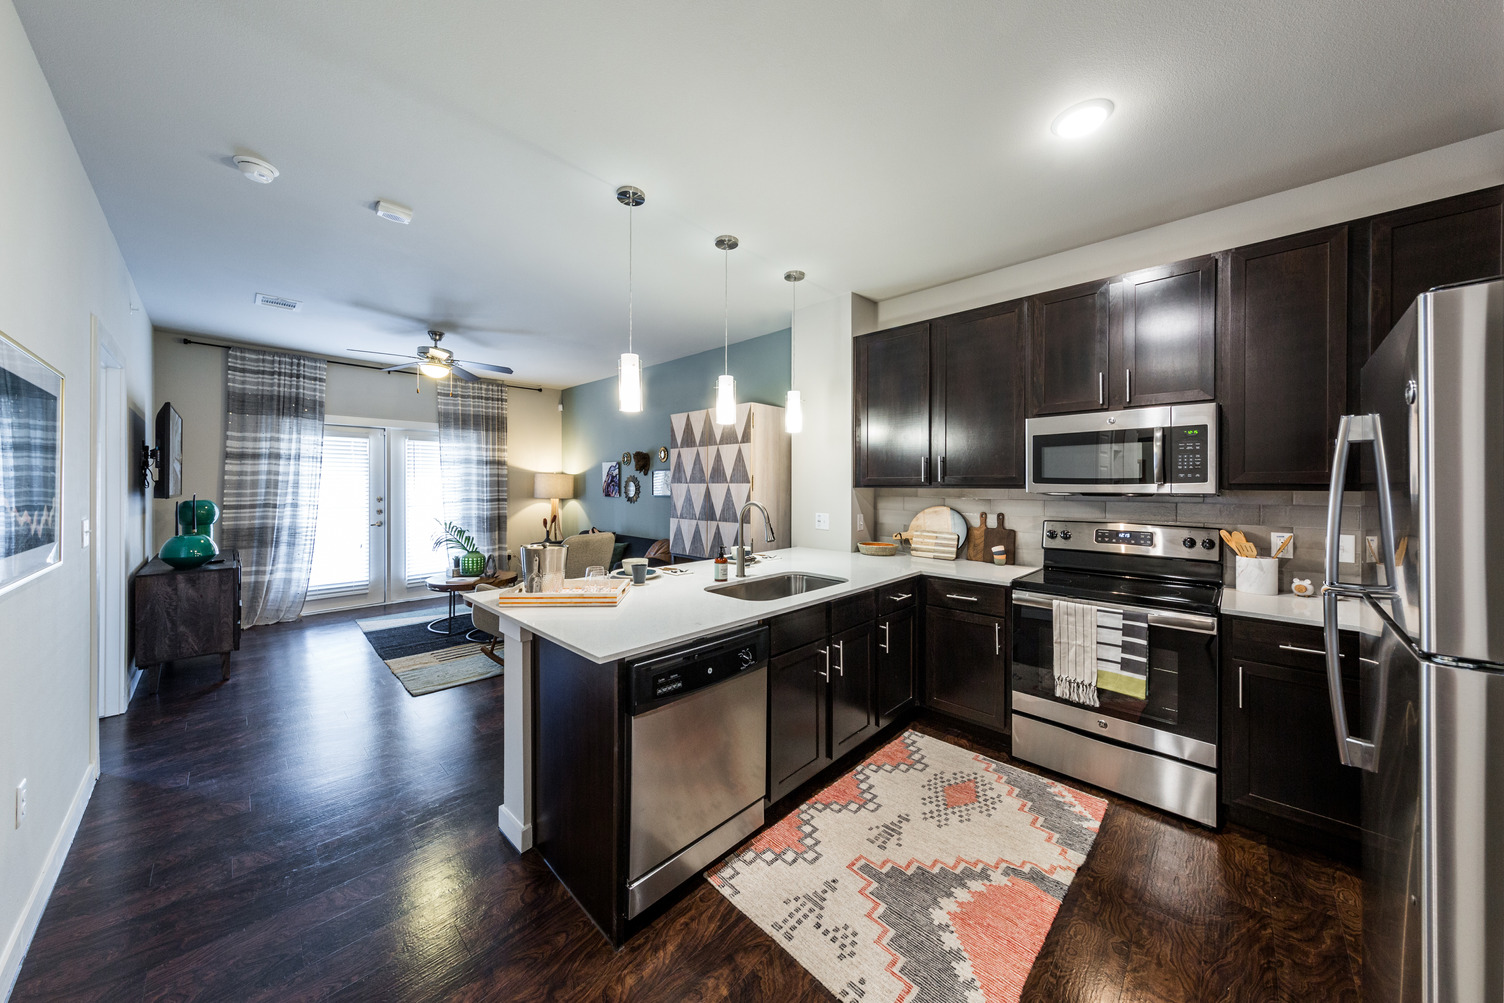 Model apartment with dark wood flooring, dark cabinets, and stainless steel appliances with pendant lighting over quartz counters